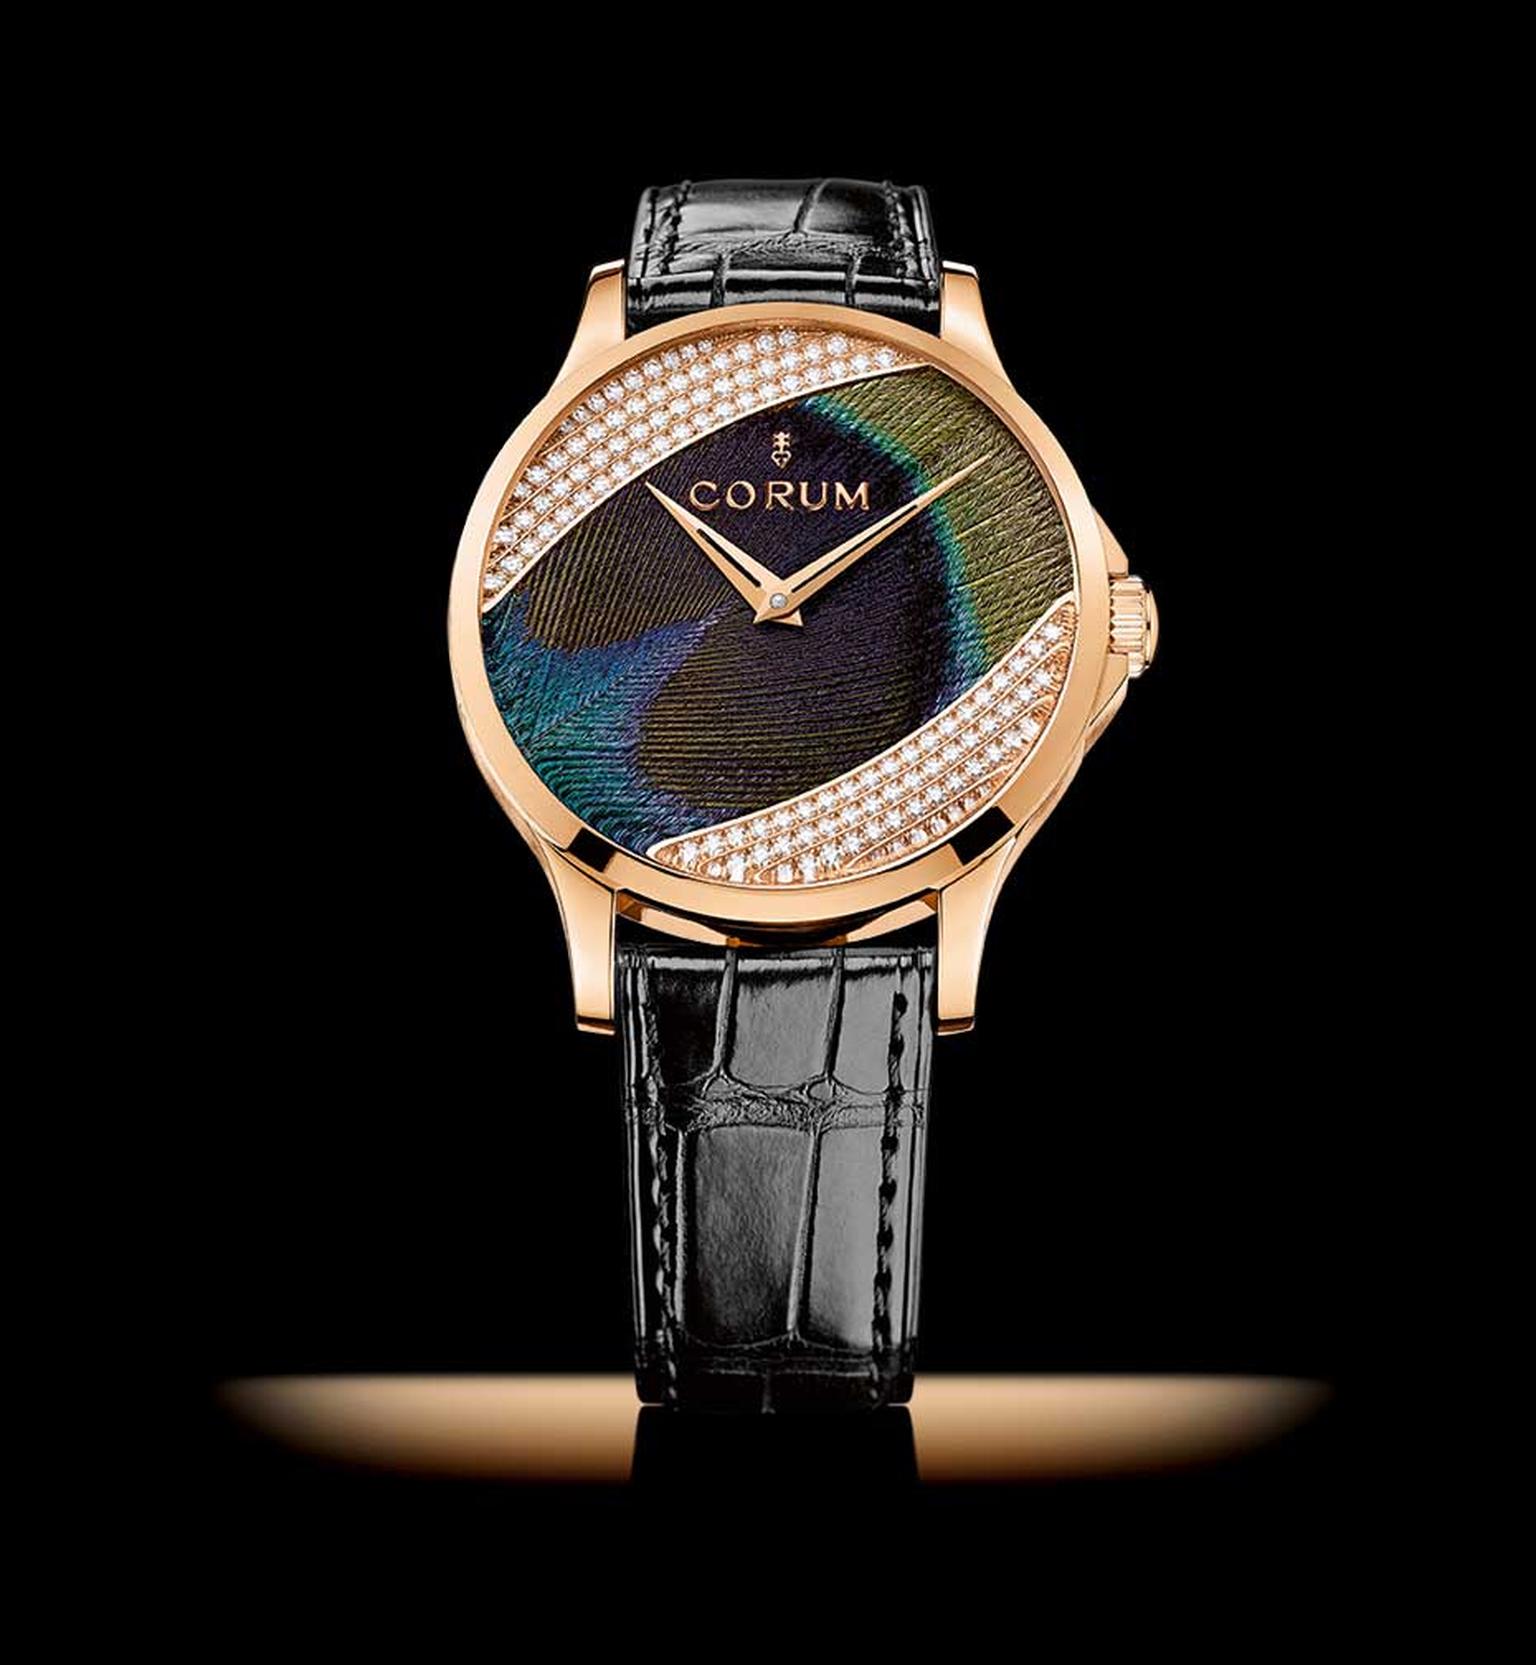 Corum Feather watch presented in a 39mm red gold case with a dial set with peacock fathers framed by 120 round-cut diamonds.